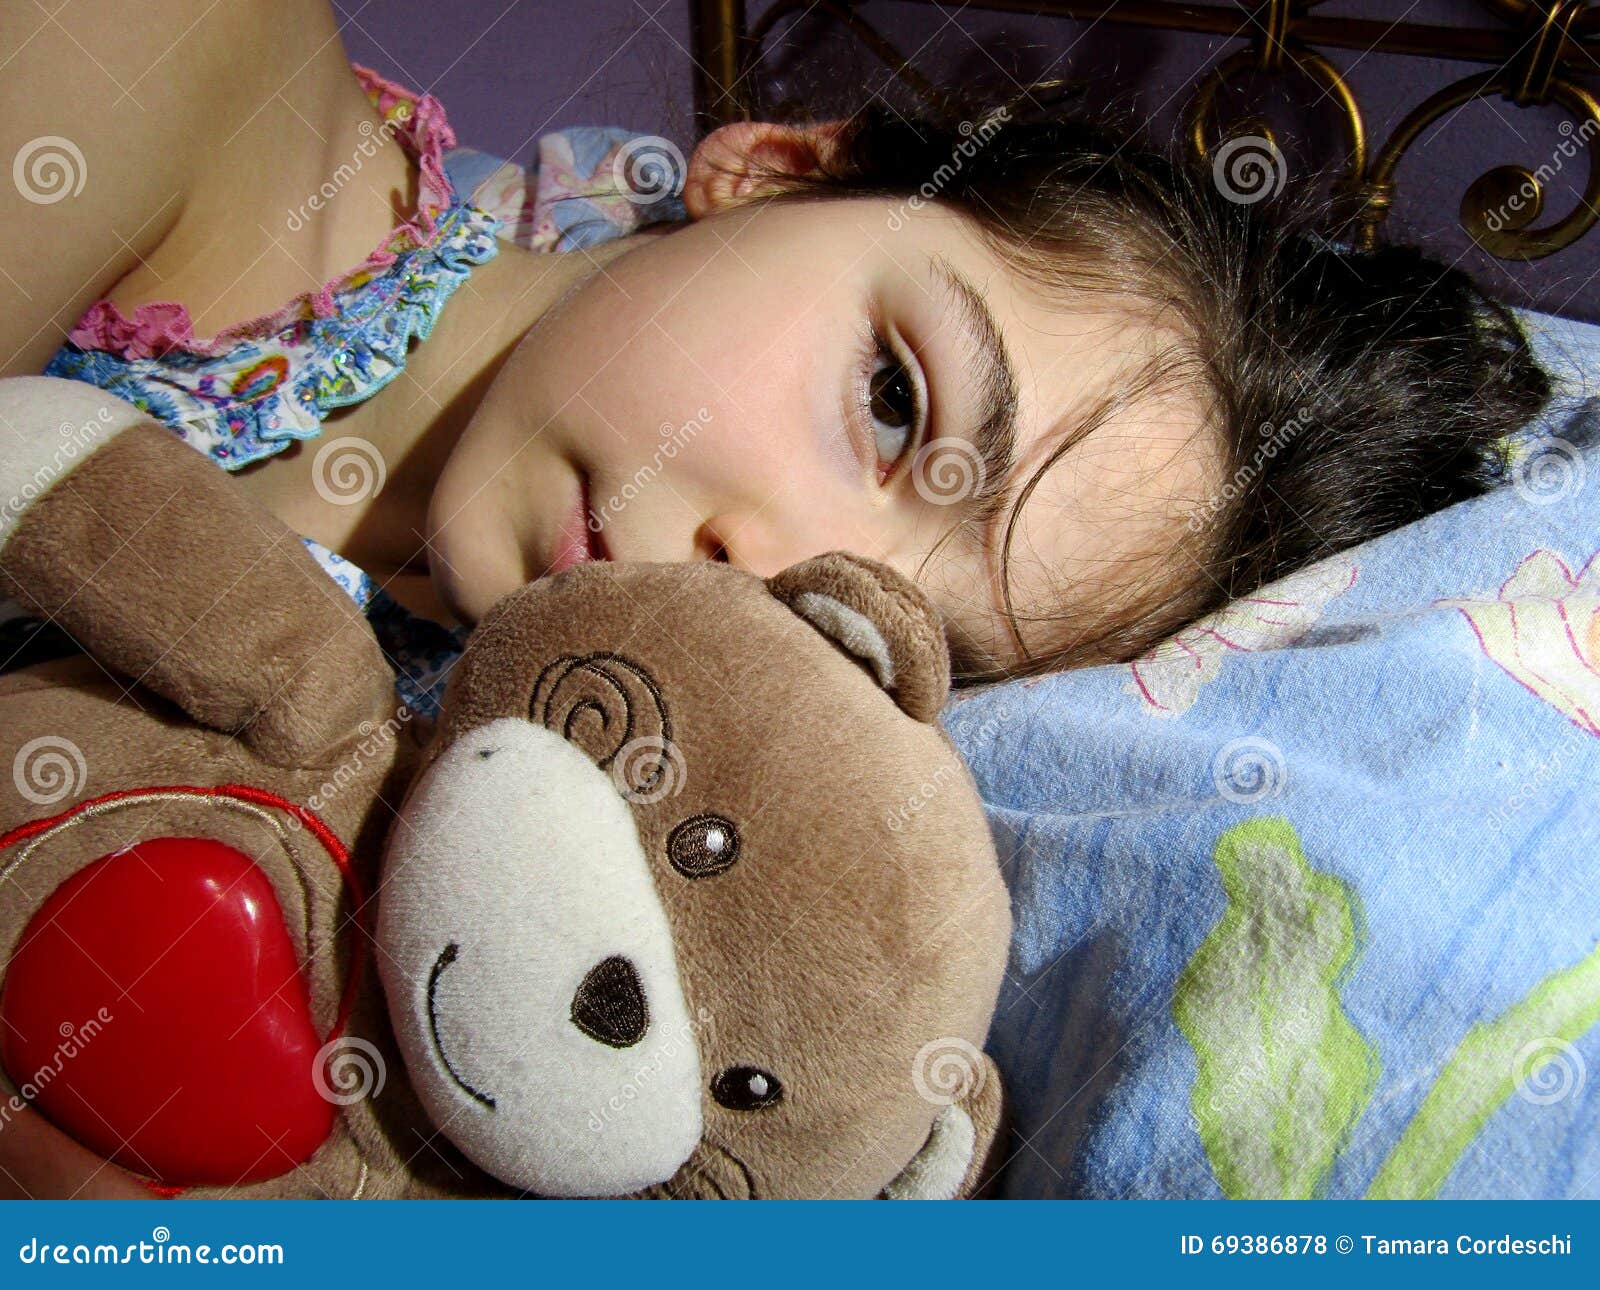 Little Girl With Her Teddy Bear Stock Photo Image of 